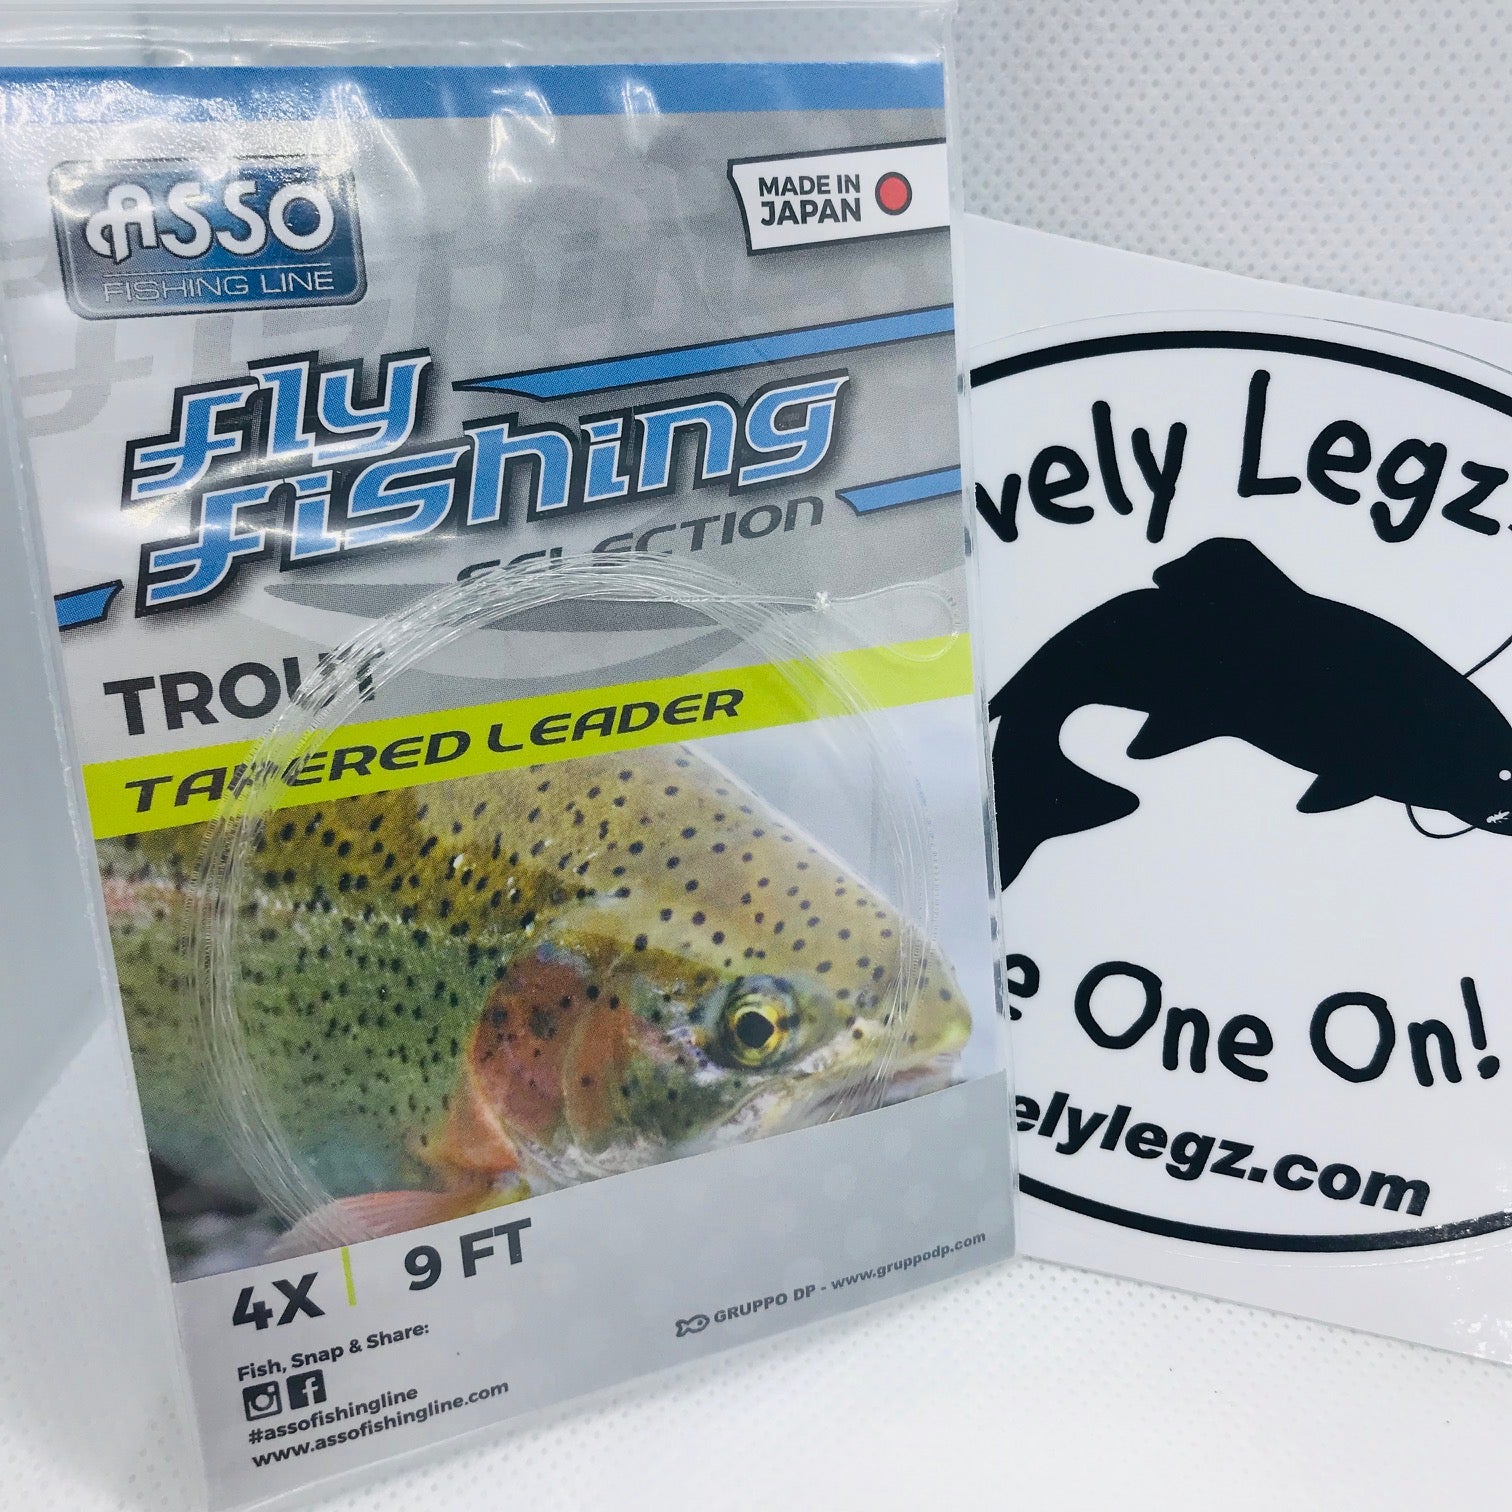 ASSO Trout Tapered Leaders – Lively Legz Fly Fishing